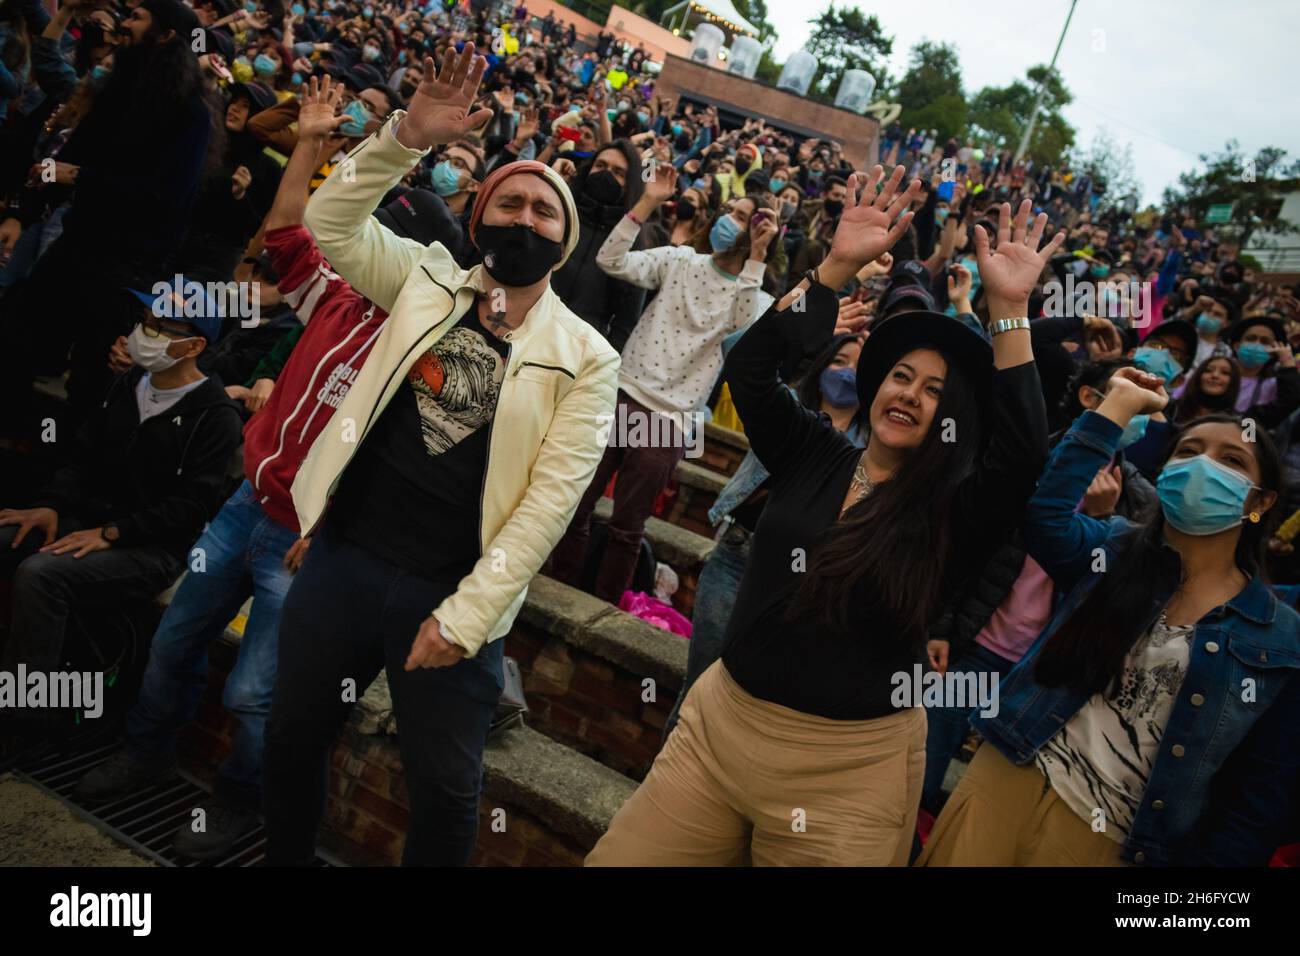 Concert goers enjoy the 2021 'Concierto Radionica 2021' were artists 'Velandia Y La Tigra, Briela Ojeda, Aterciopelados, Belgram and N Hardem, DJ Mike Style & Friends' the first concert with an occupation of a 100% amidst the aease of COVID-19 restrictions in Bogota, Colombia on November 13, 2021. Stock Photo